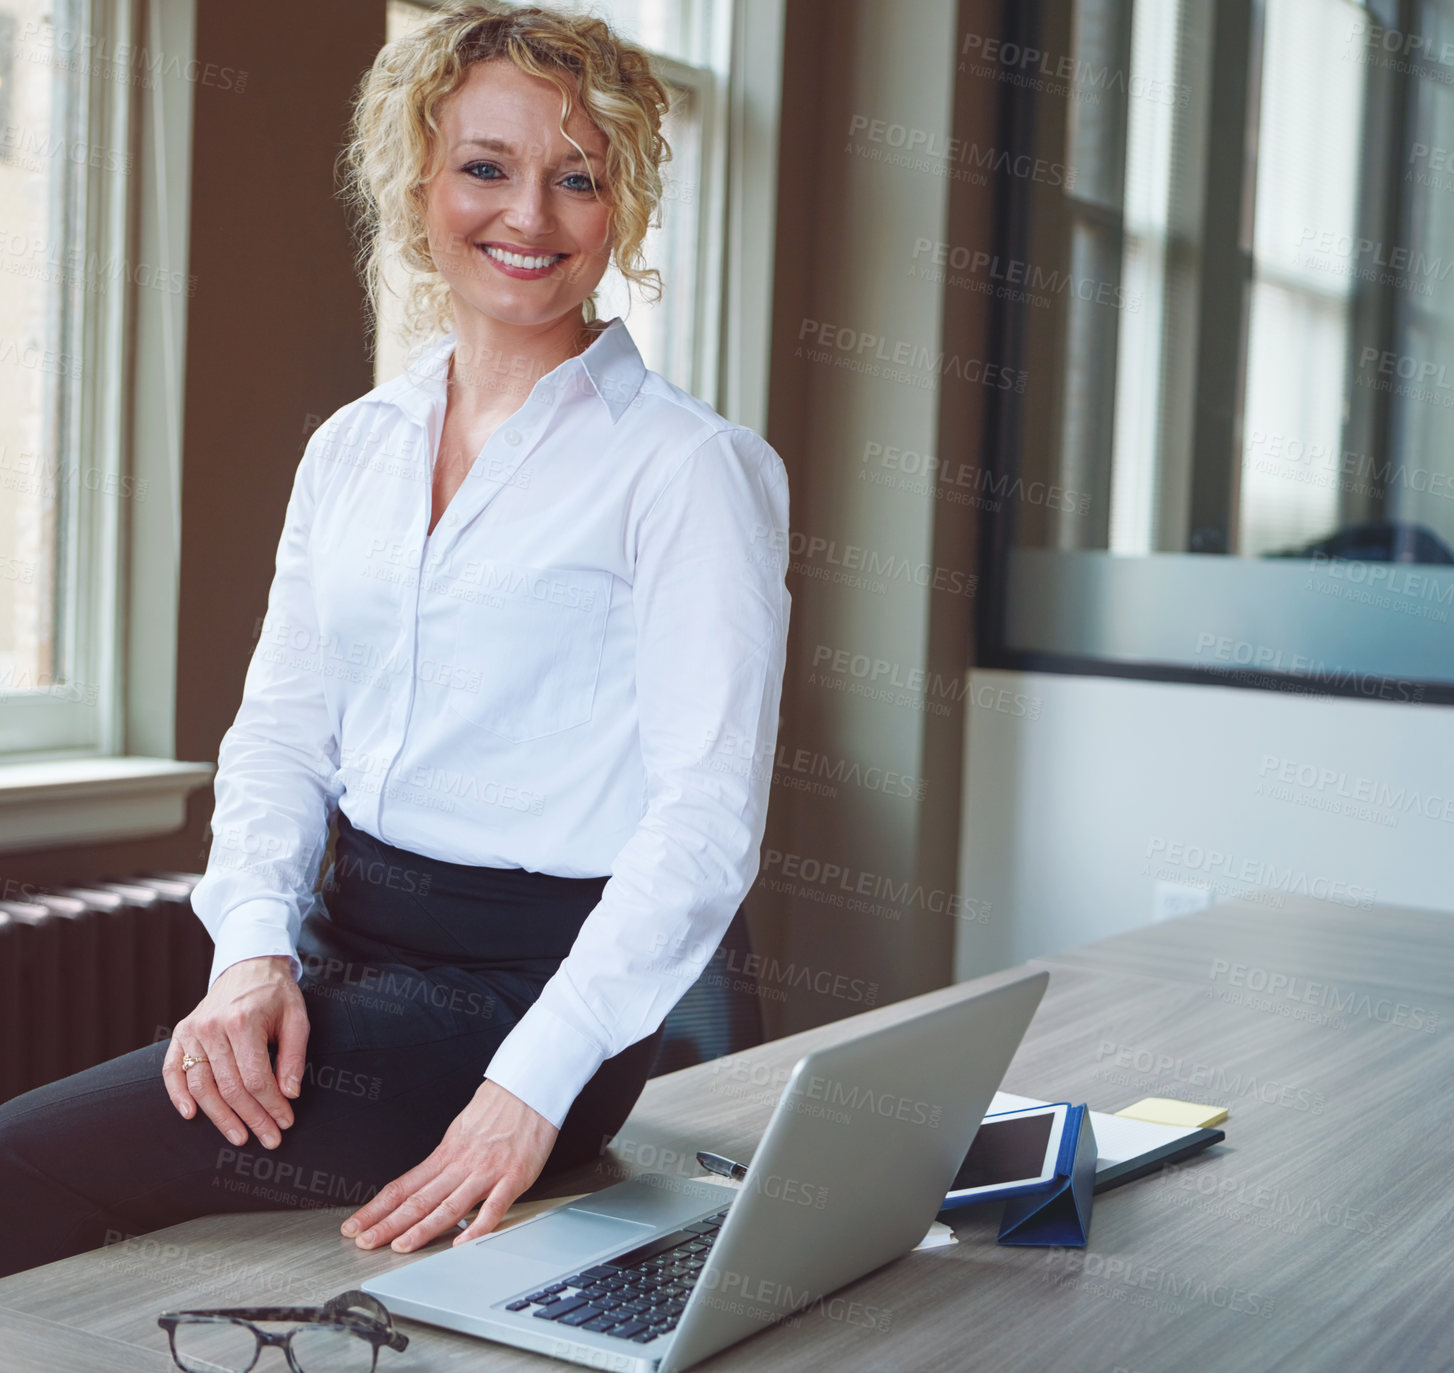 Buy stock photo Portrait of a businesswoman working at her desk in an office